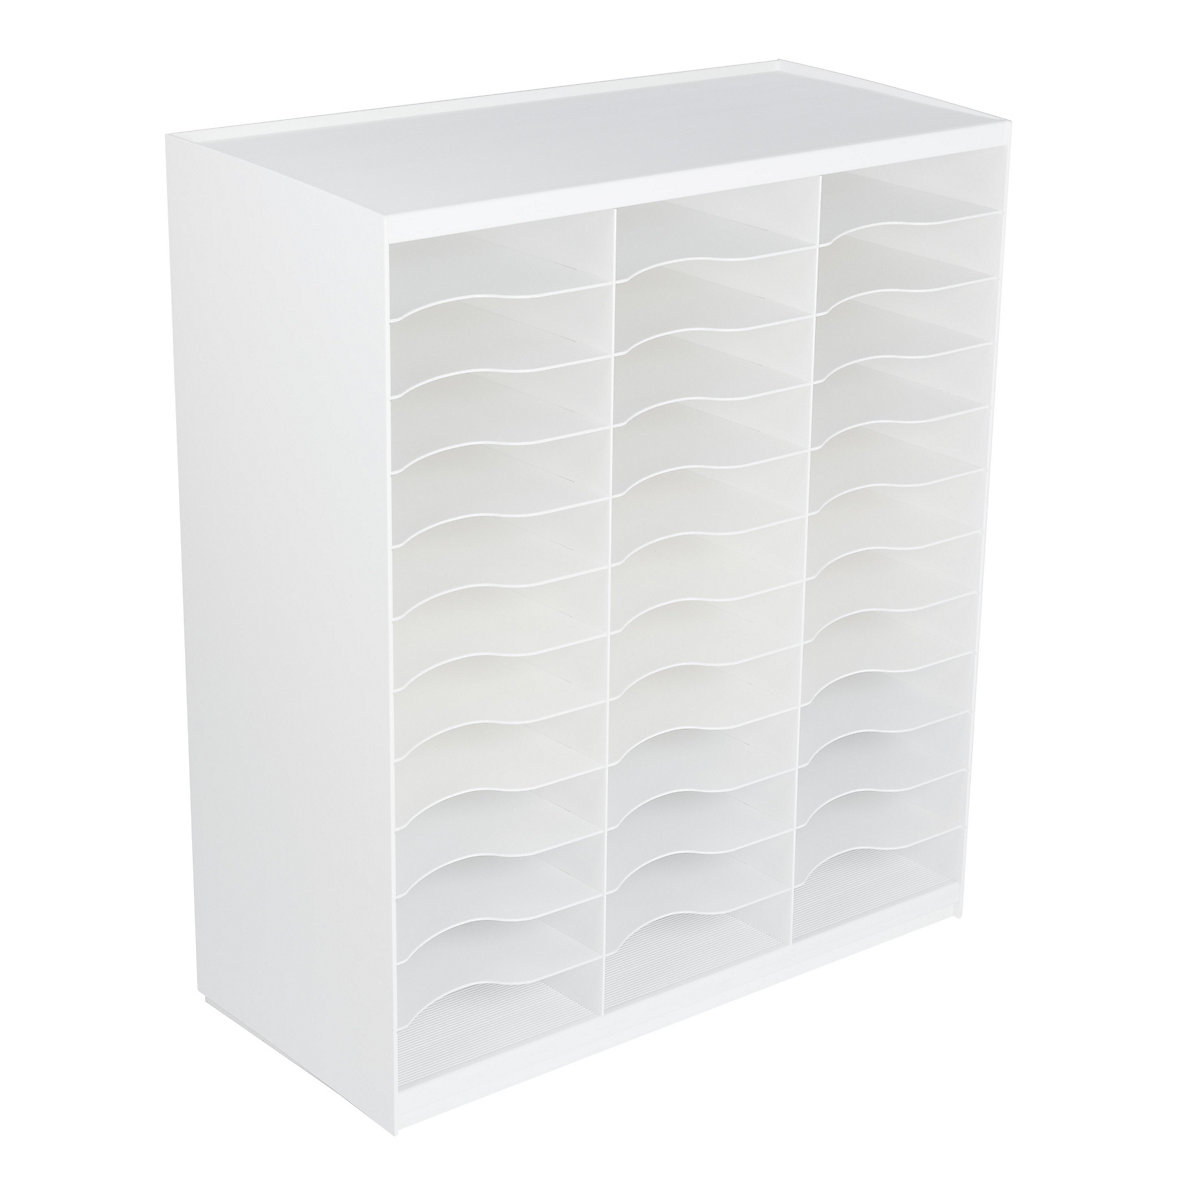 Sorting station, made of polystyrene, 36 compartments, white